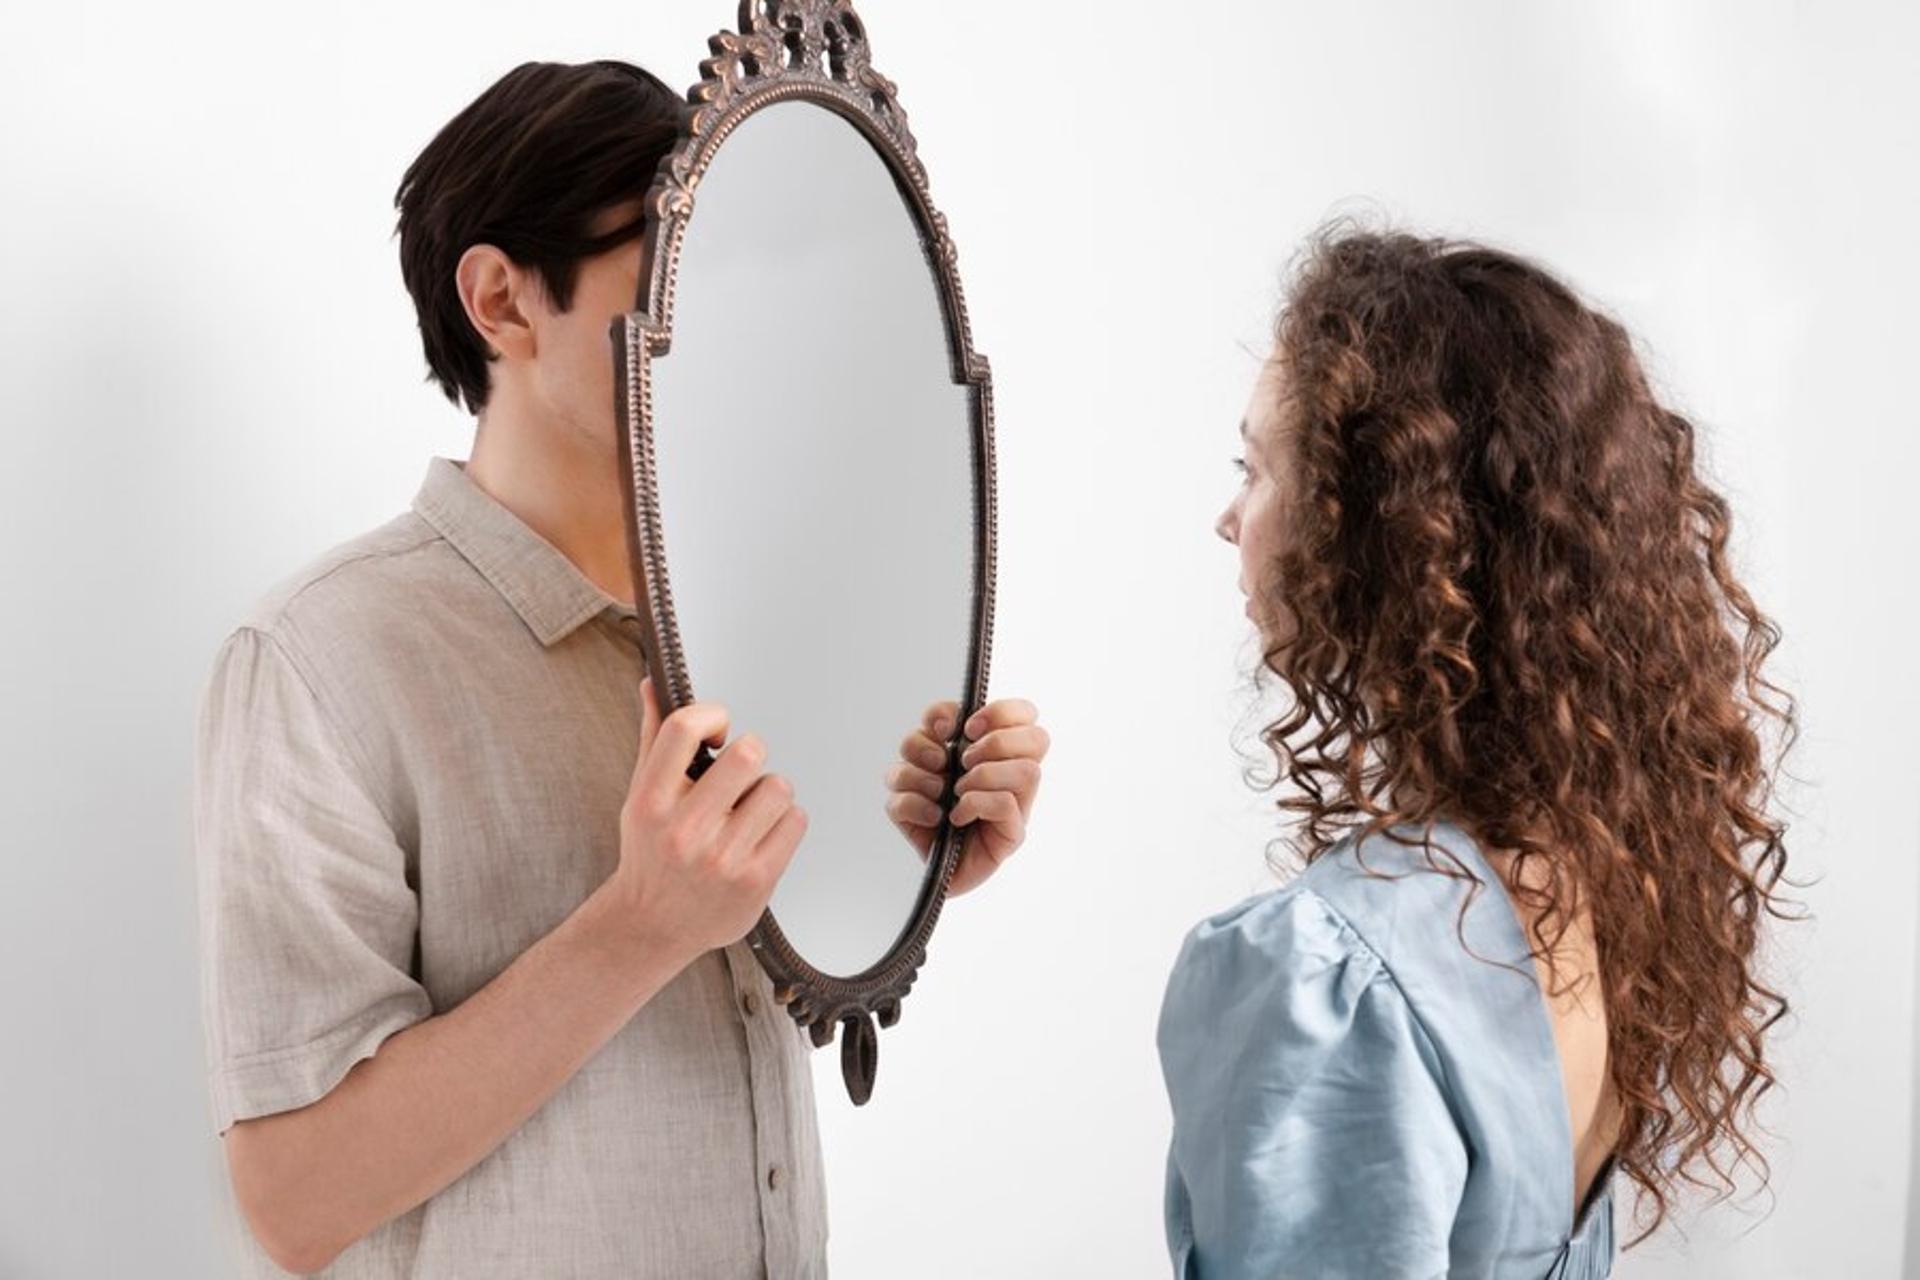 Man standing behind a mirror while a woman stands in front of it